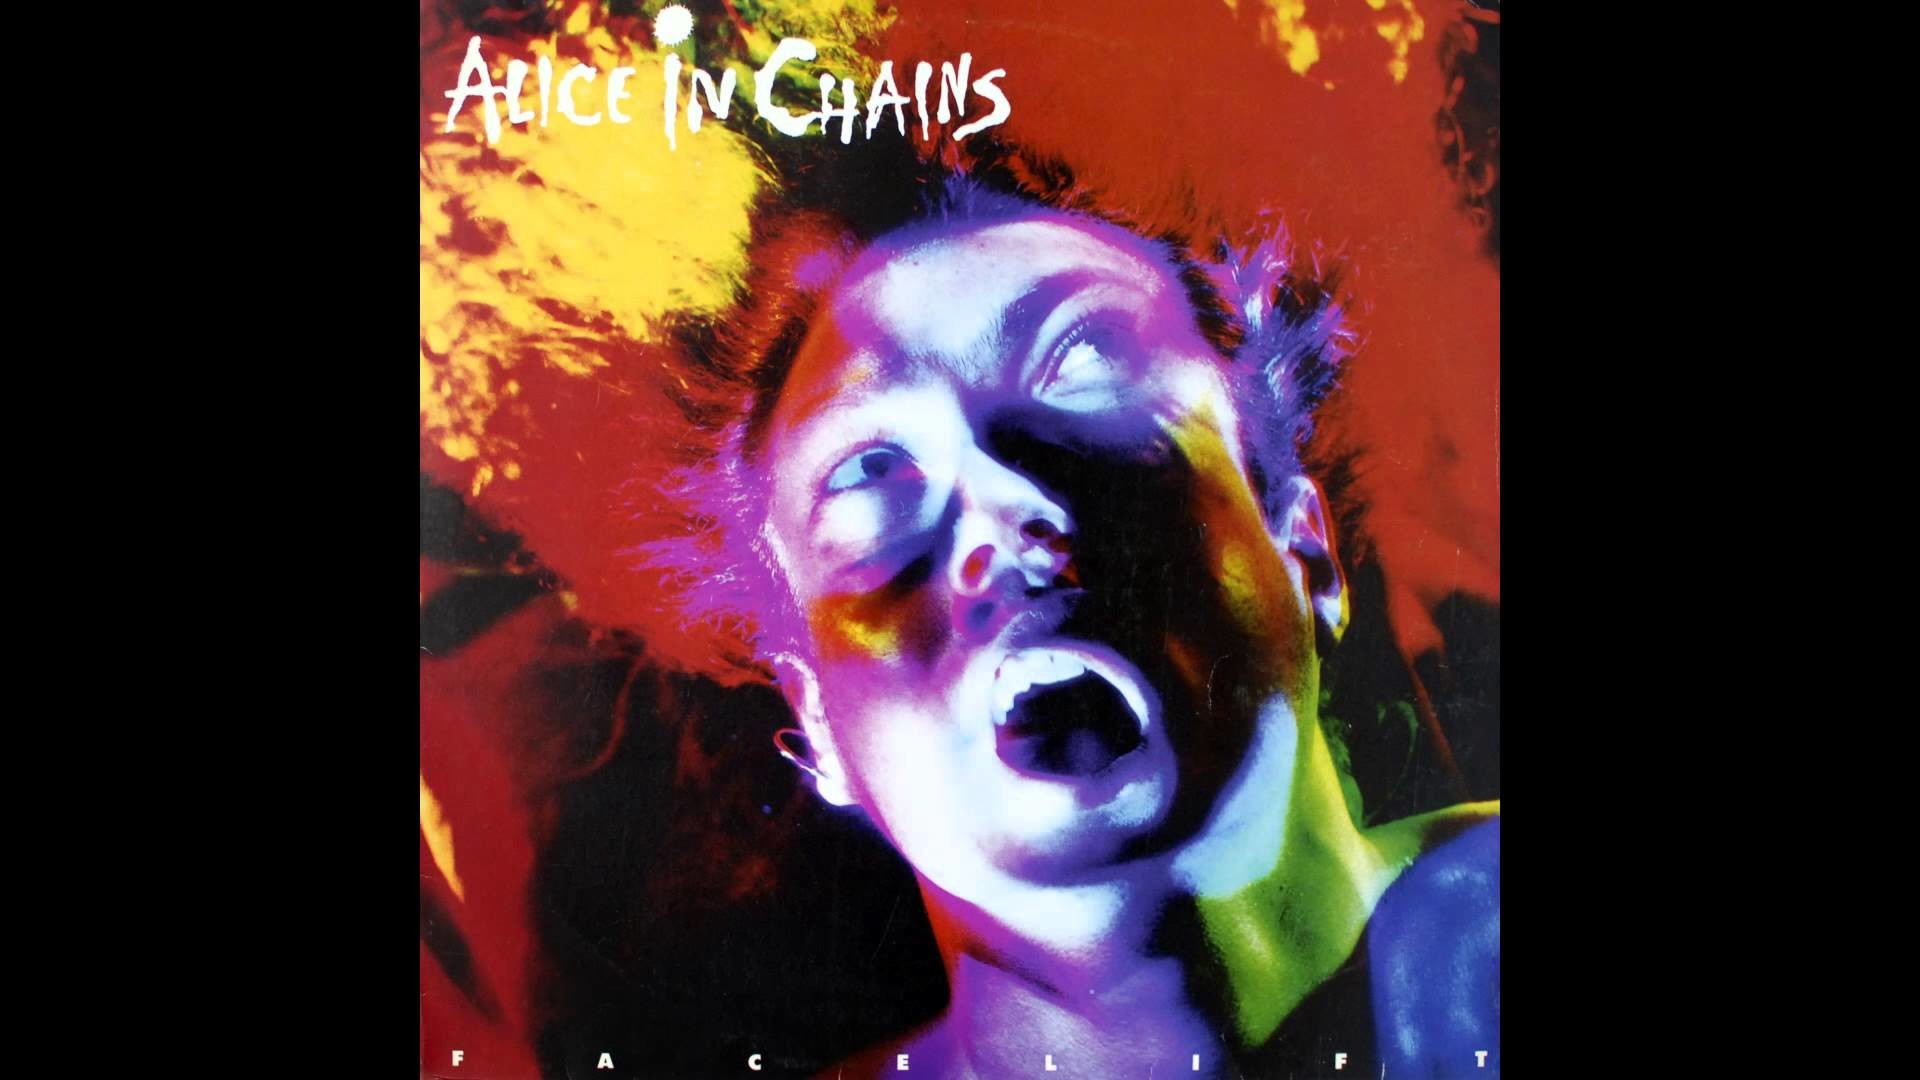 alice in chains wallpaper,fictional character,art,fun,graphic design,album cover